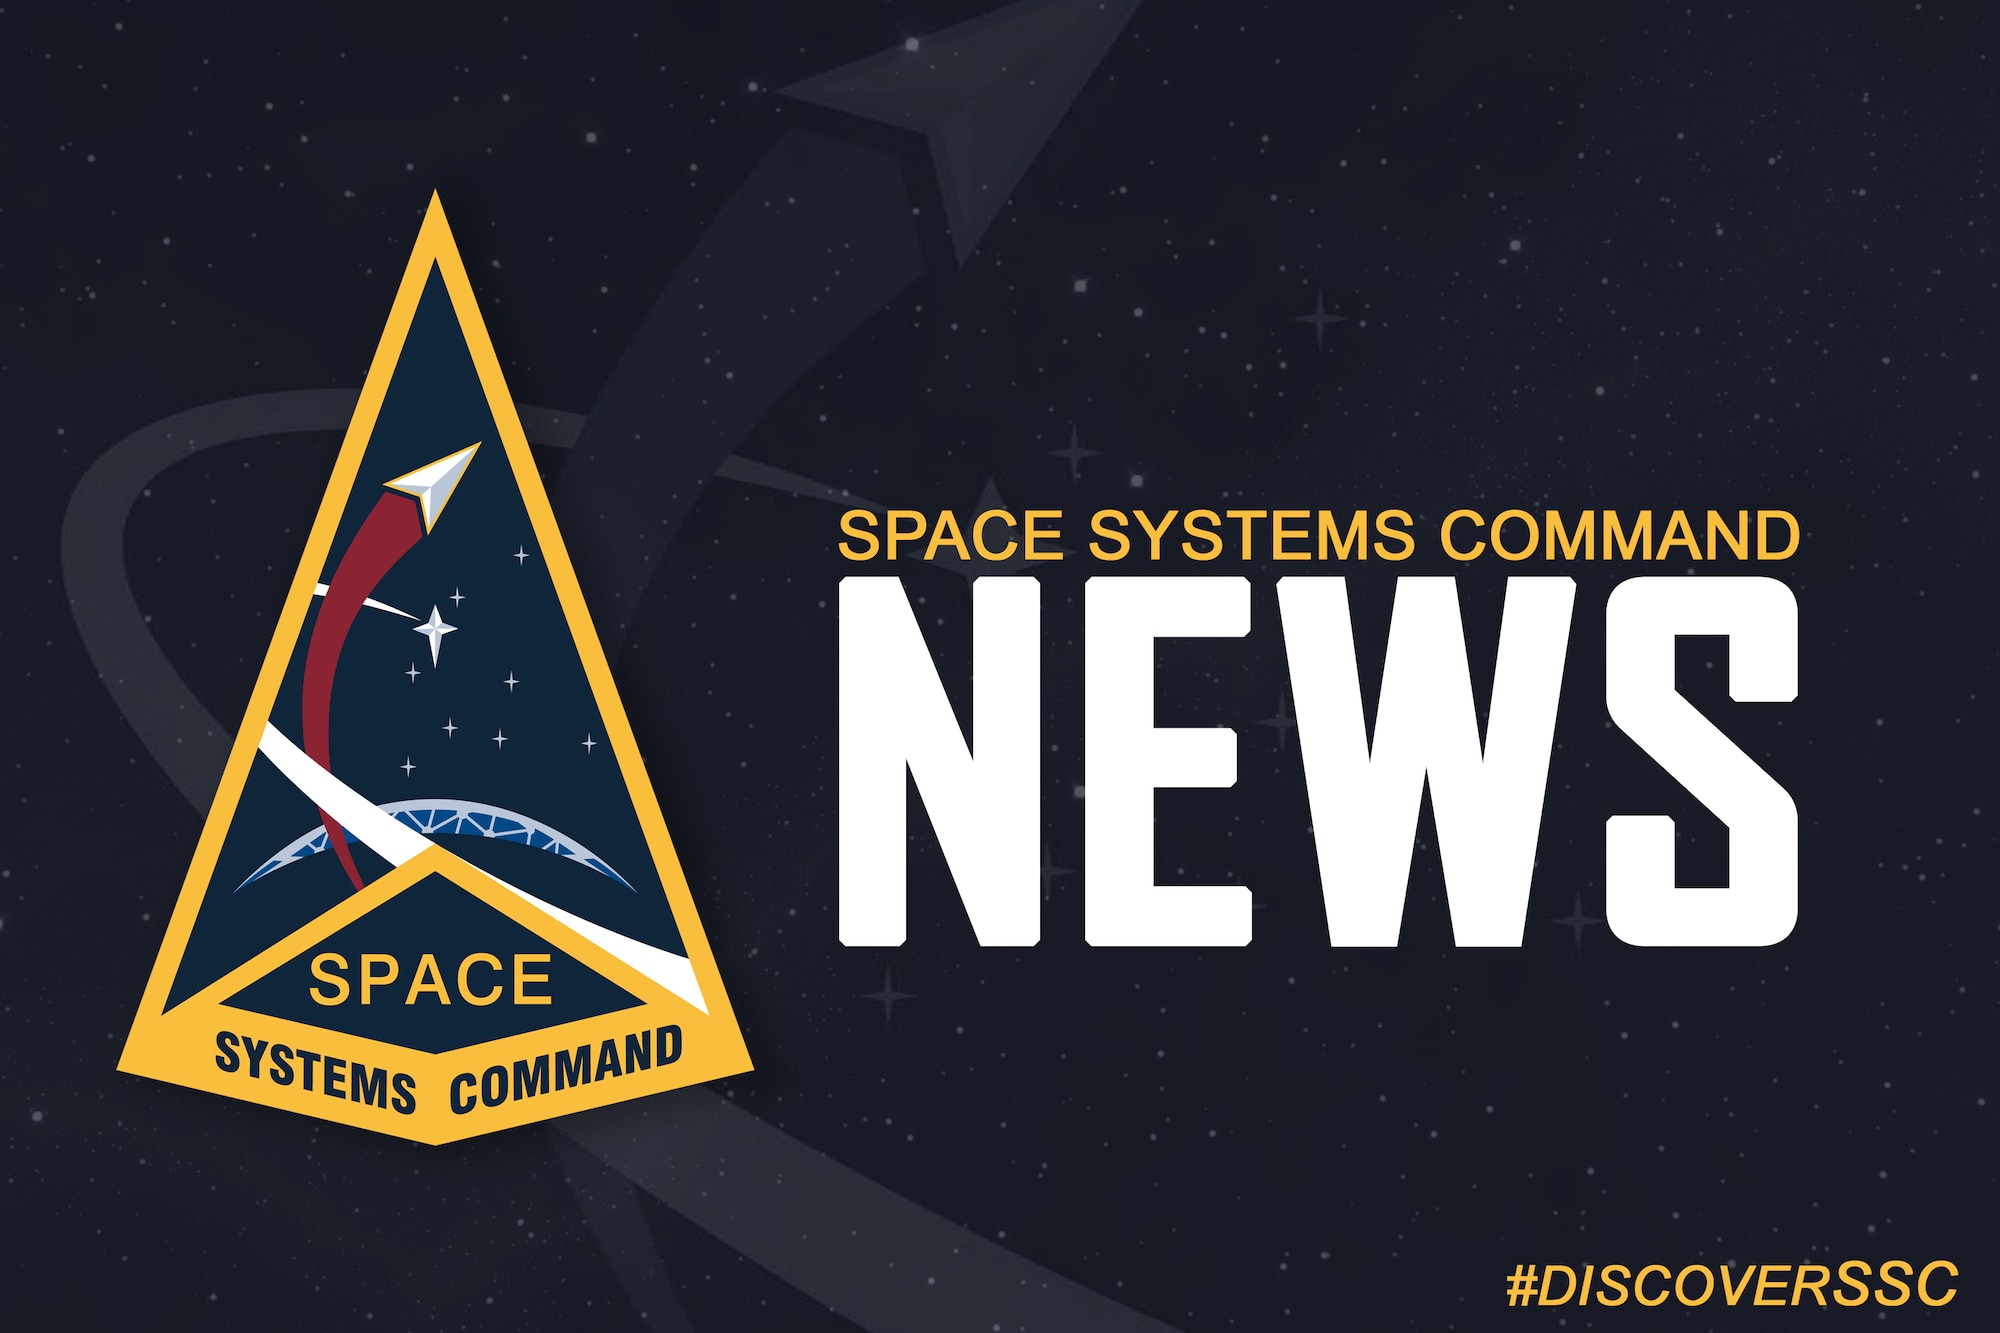 This is a news update from Space Systems Command.